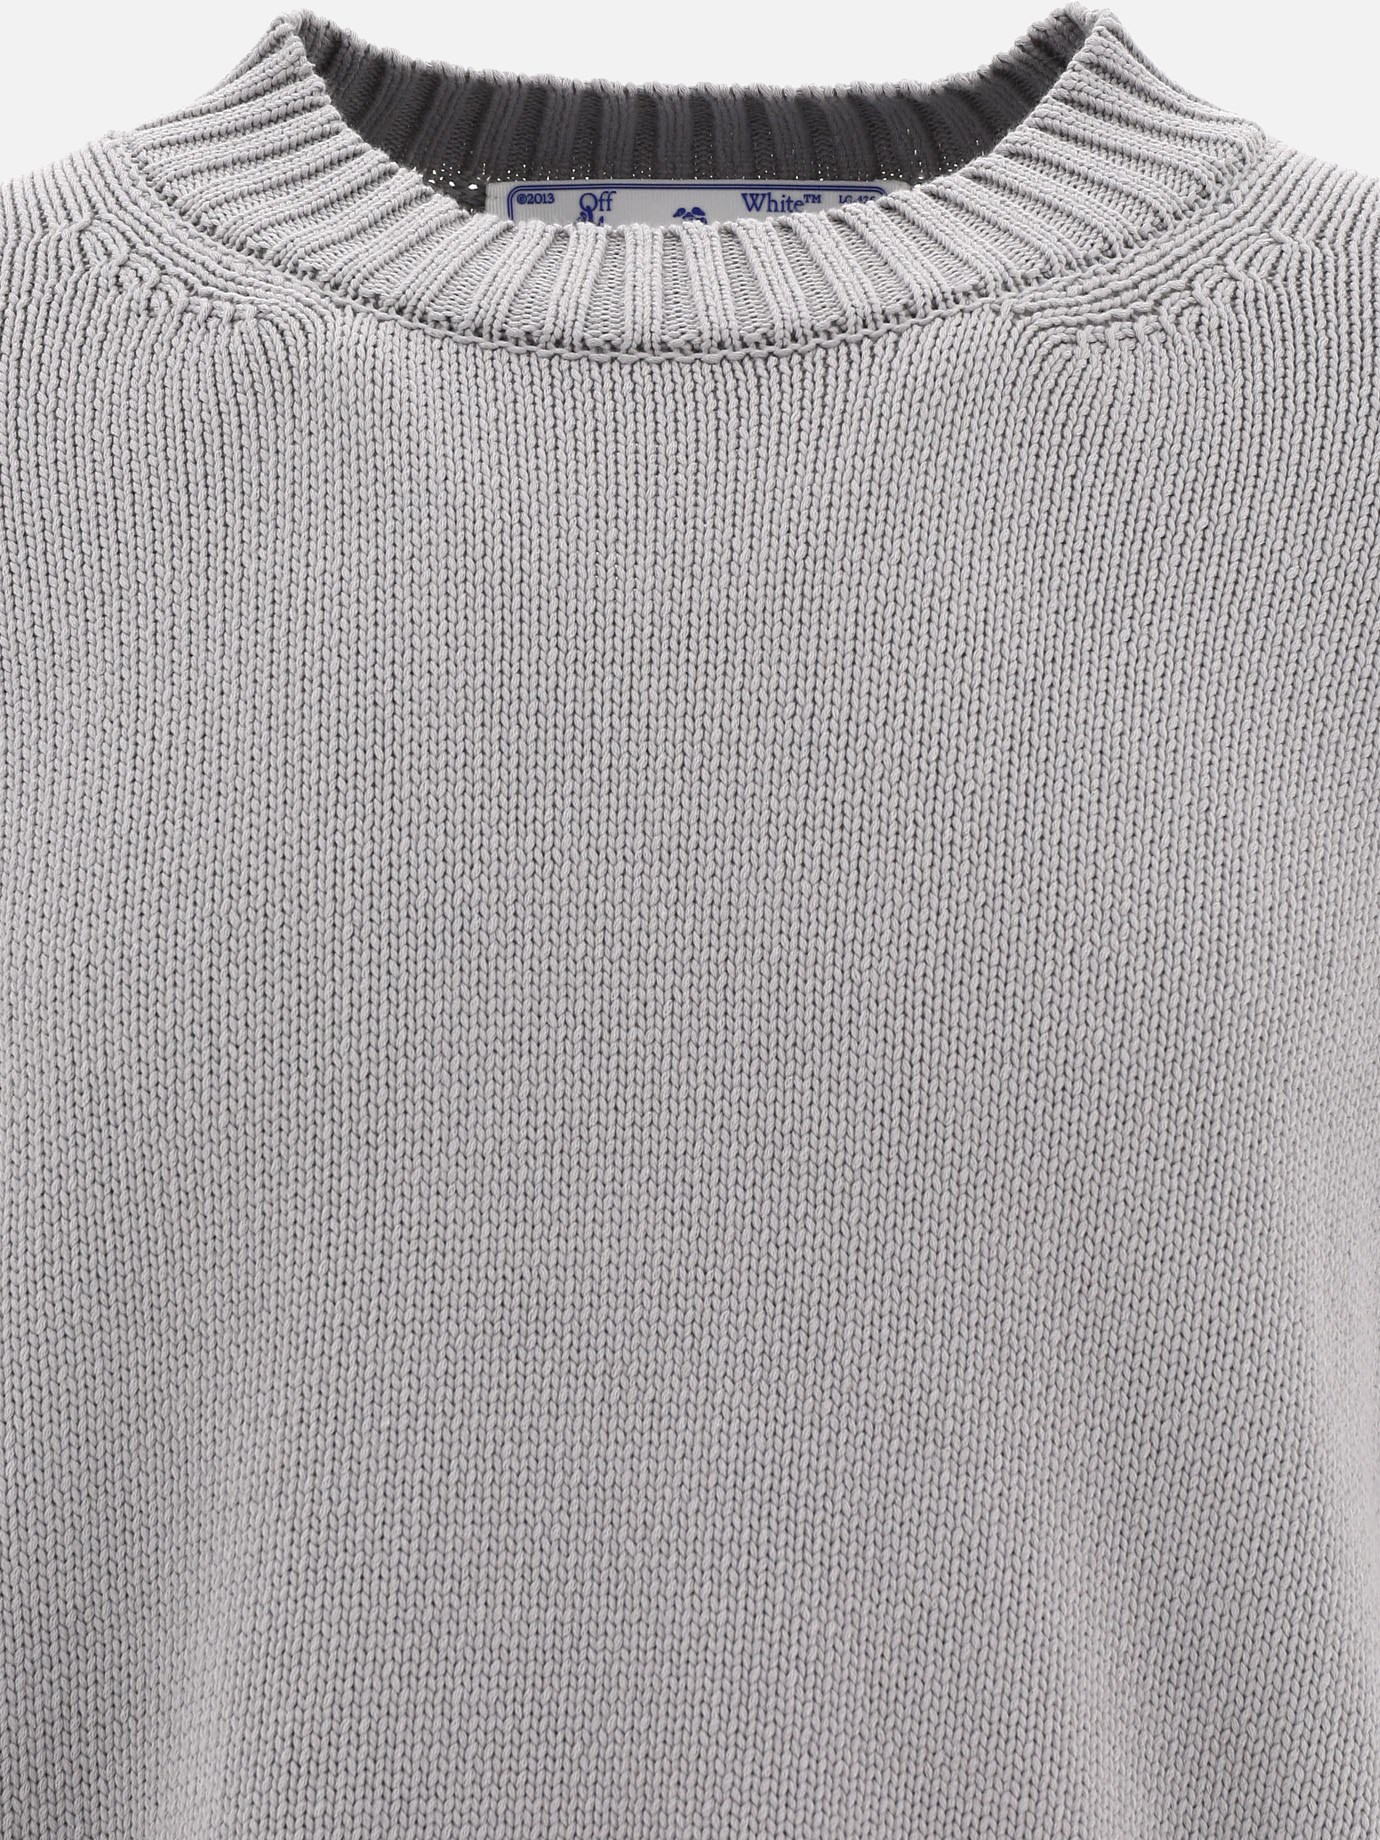  Diag Outline  sweater by Off-White